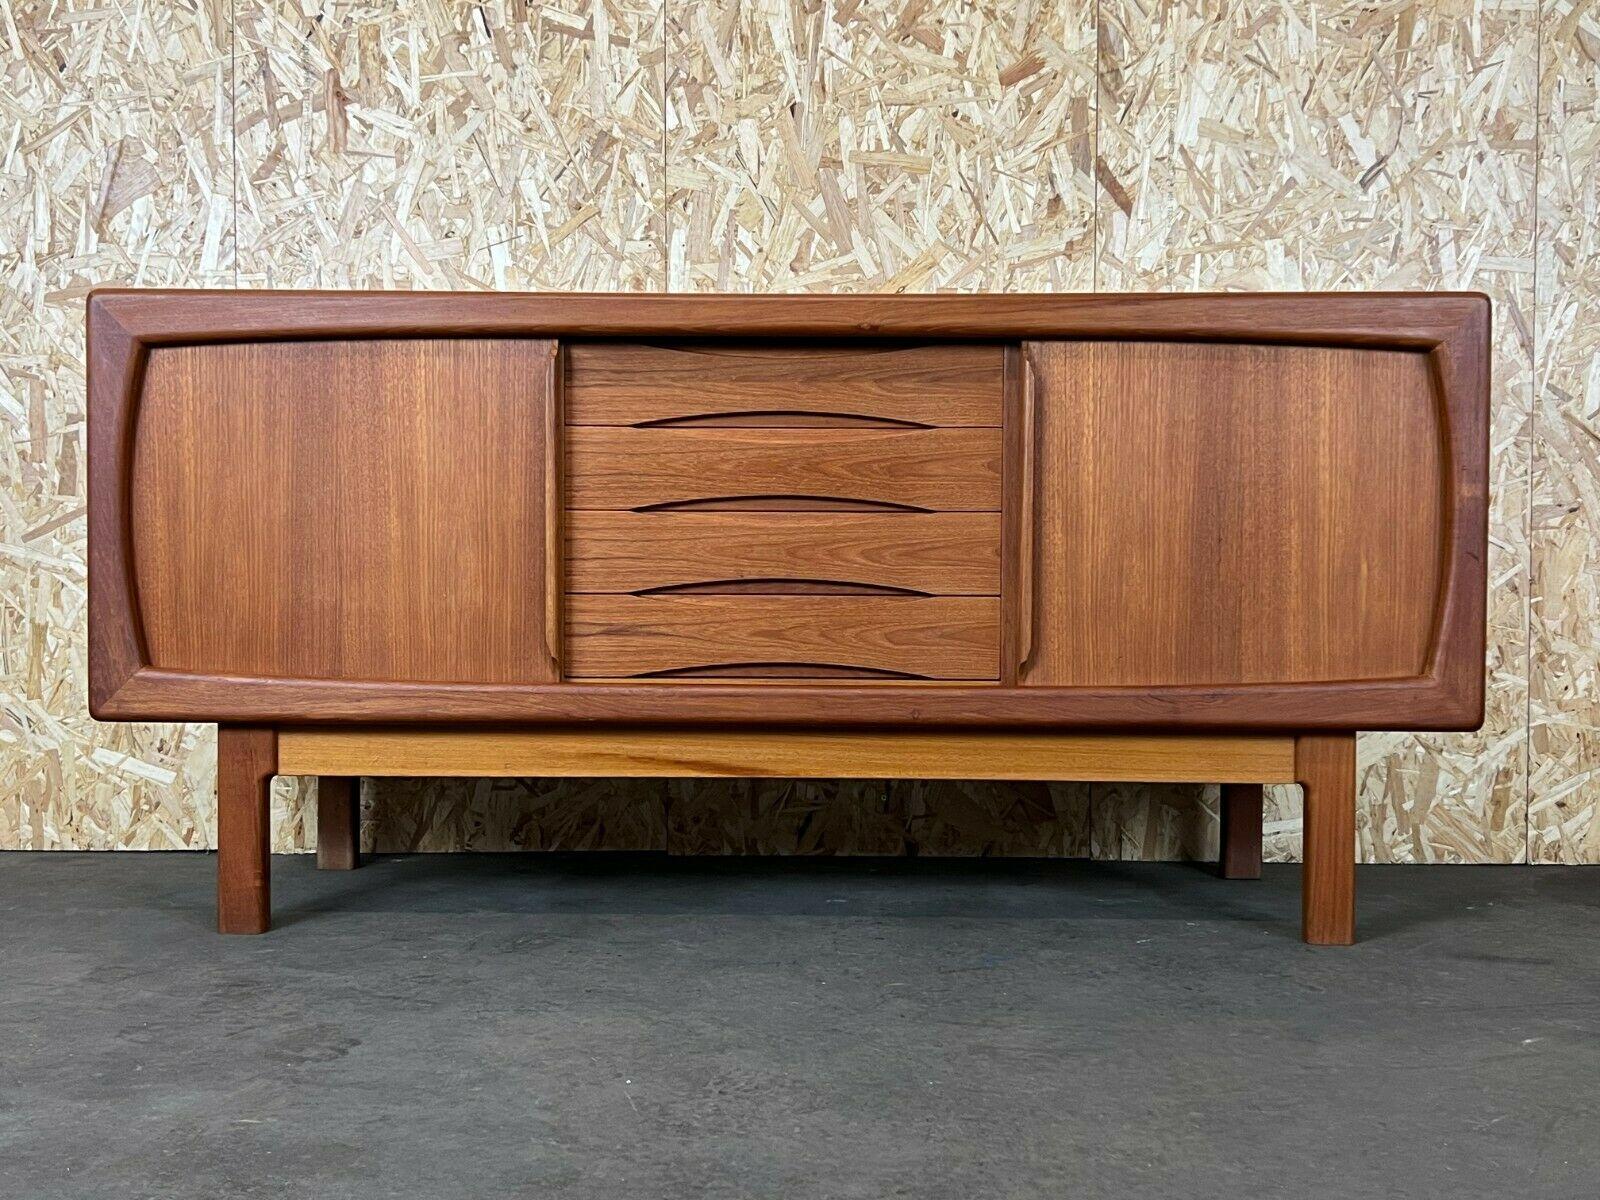 60s 70s teak sideboard Credenza H.P Hansen Danish Design Denmark 60s 70s

Object: sideboard

Manufacturer: HP Hansen

Condition: good

Age: around 1960-1970

Dimensions:

160cm x 49.5cm x 75.5cm

Other notes:

The pictures serve as